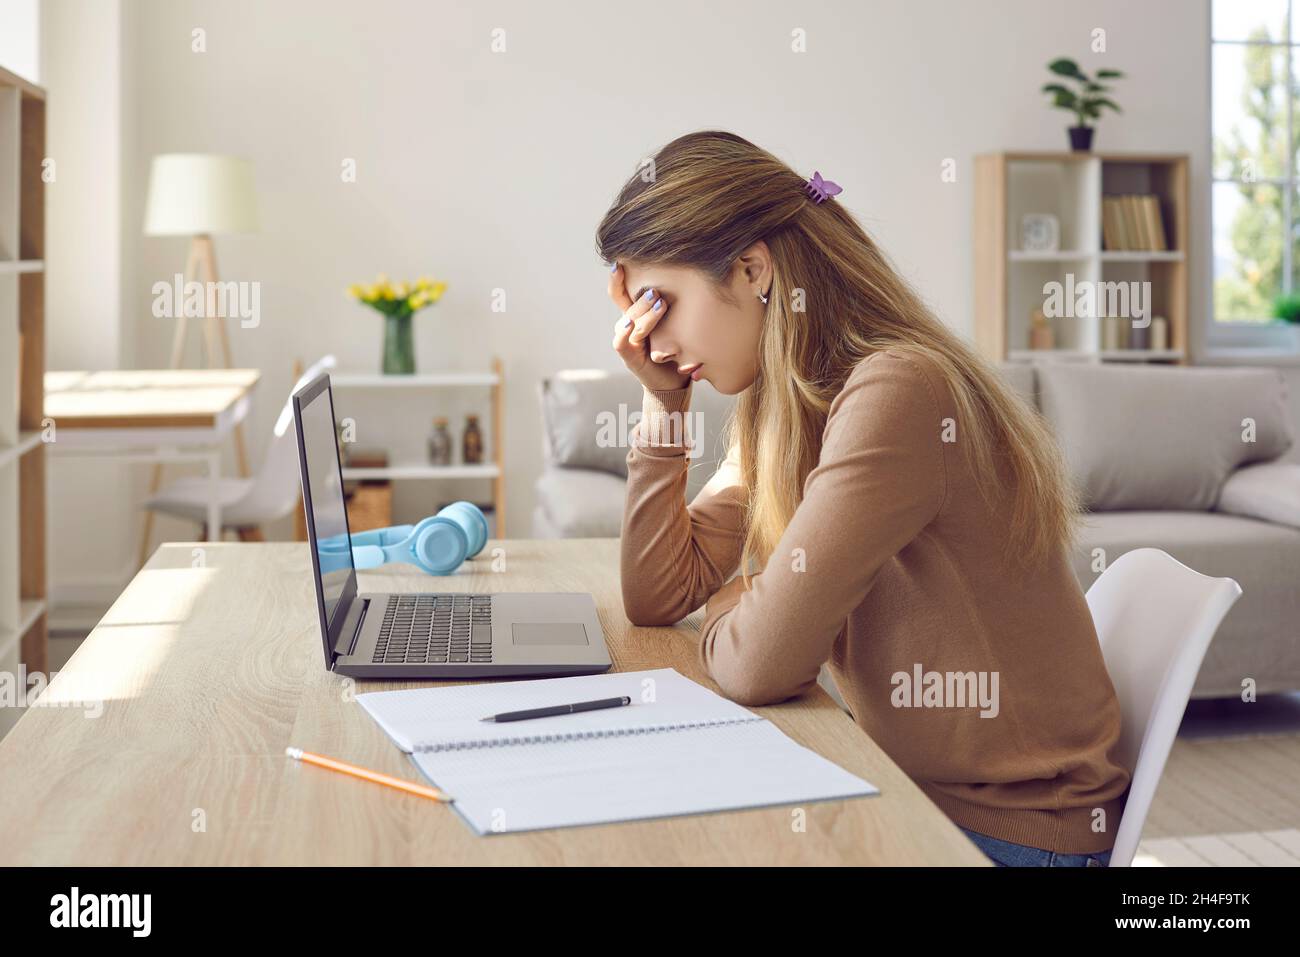 Bored frustrated female student tired of studying, working on laptop or sitting at home. Stock Photo